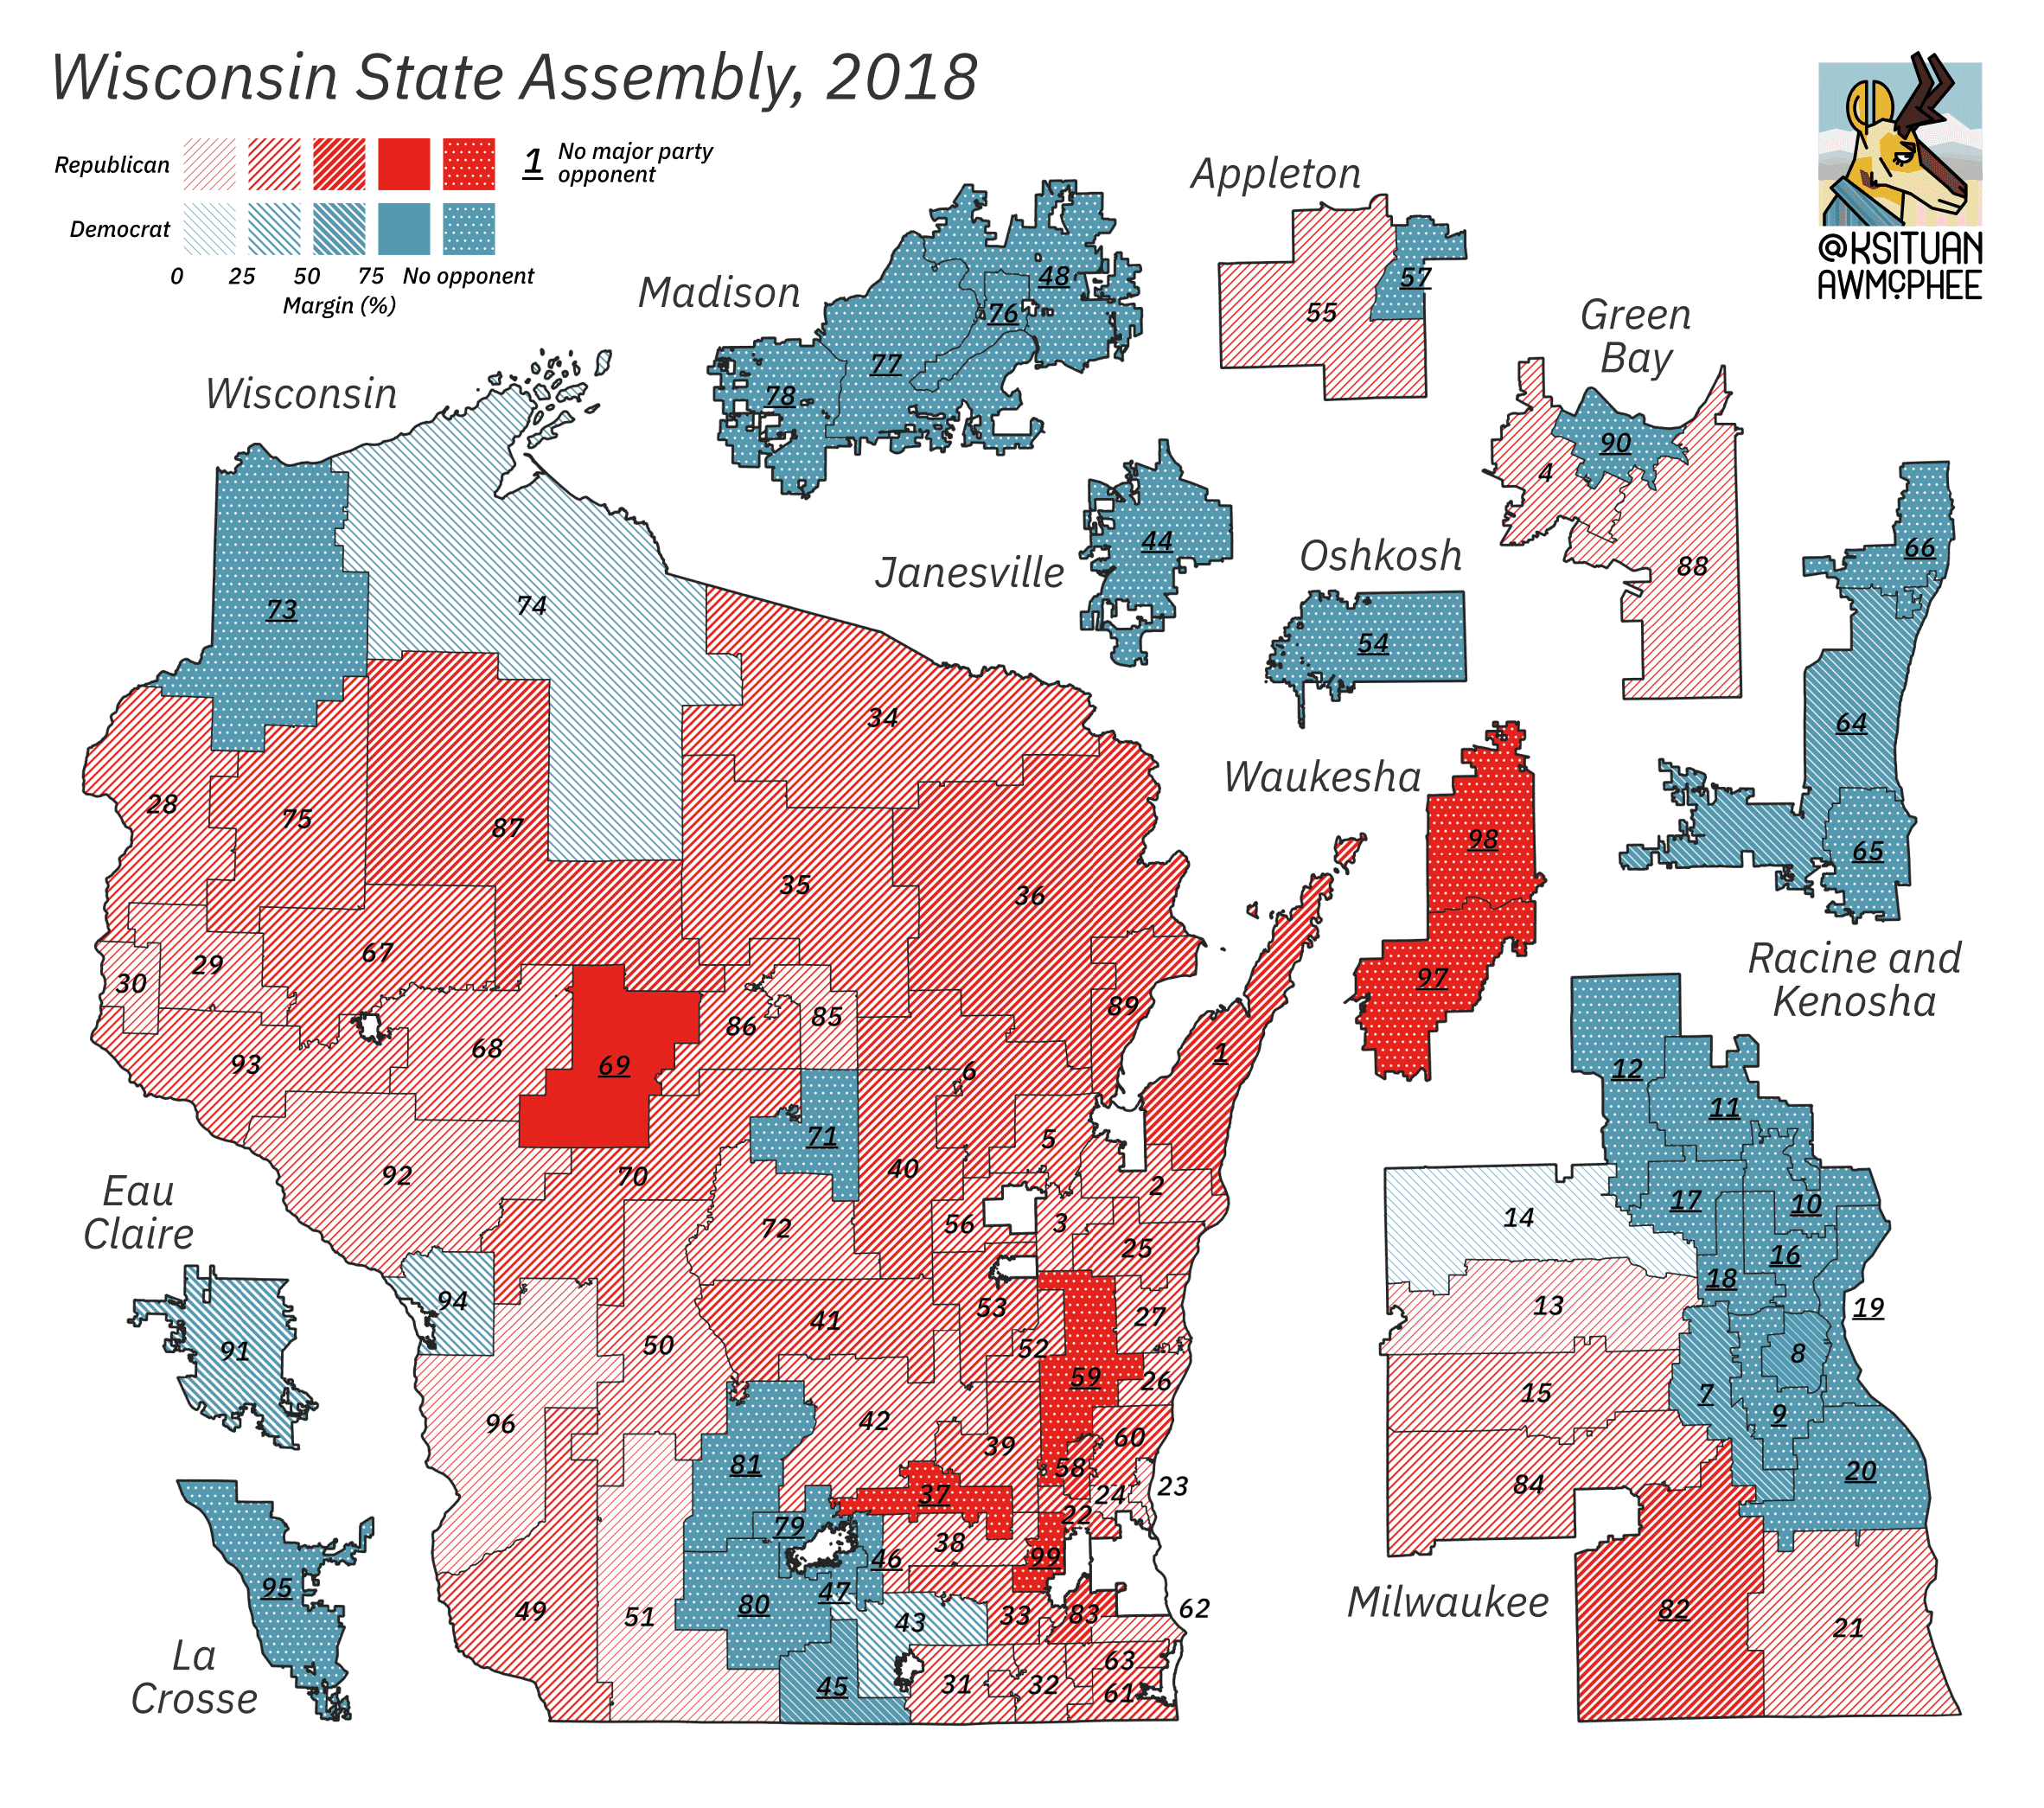 A political map of Wisconsin.